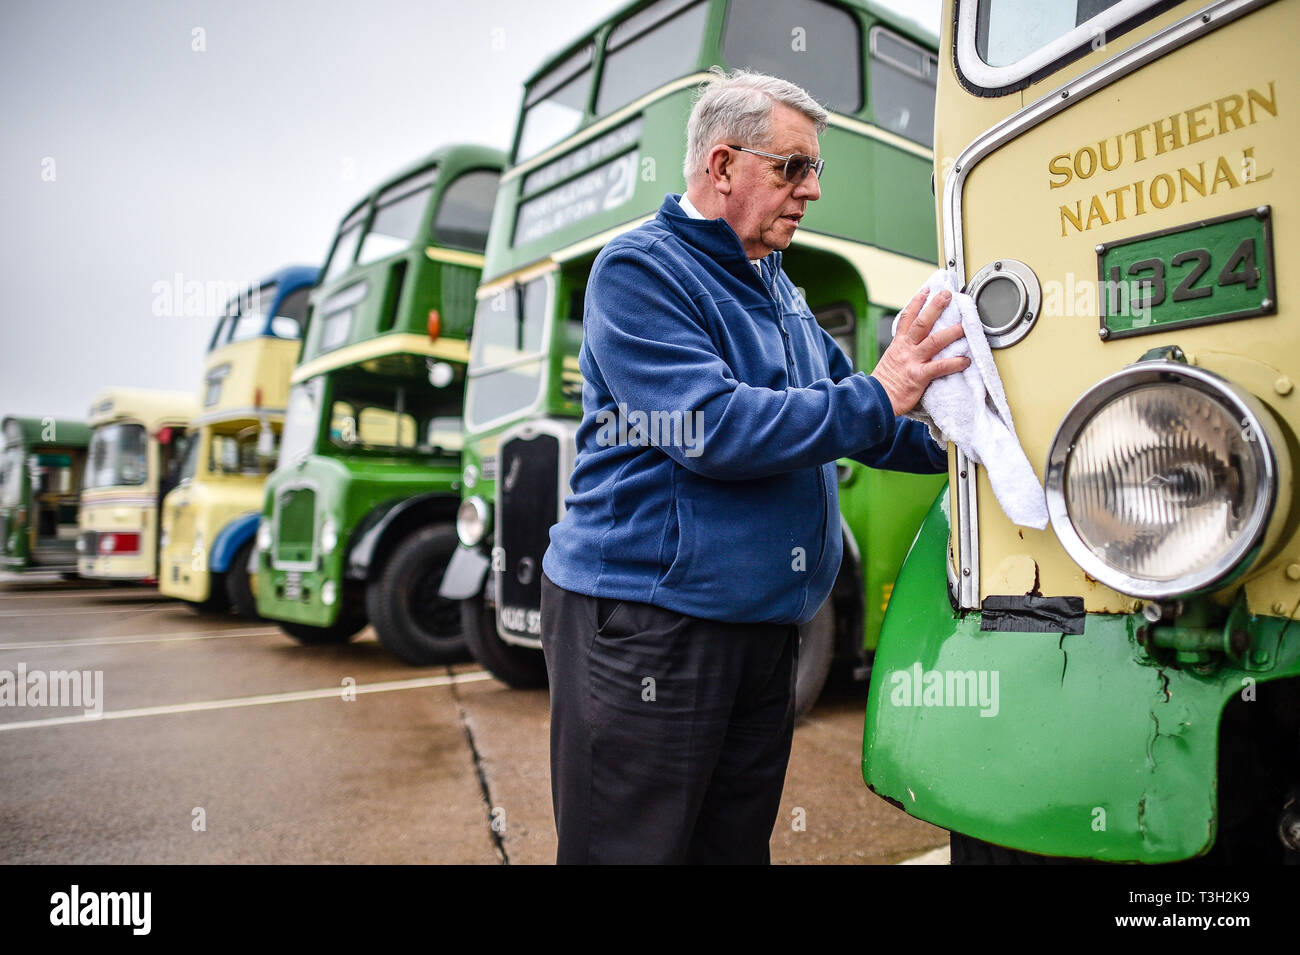 Classic bus driver Nicky Reason cleans the lights on a Bristol L Southern National 1324, as a vintage Bristol vehicle rally prepares to drive from Aerospace Bristol to the Fleet Air Arm Museum in Yeovilton, Somerset, where the Bristol Aeroplane Company produced Bristol Cars. Stock Photo